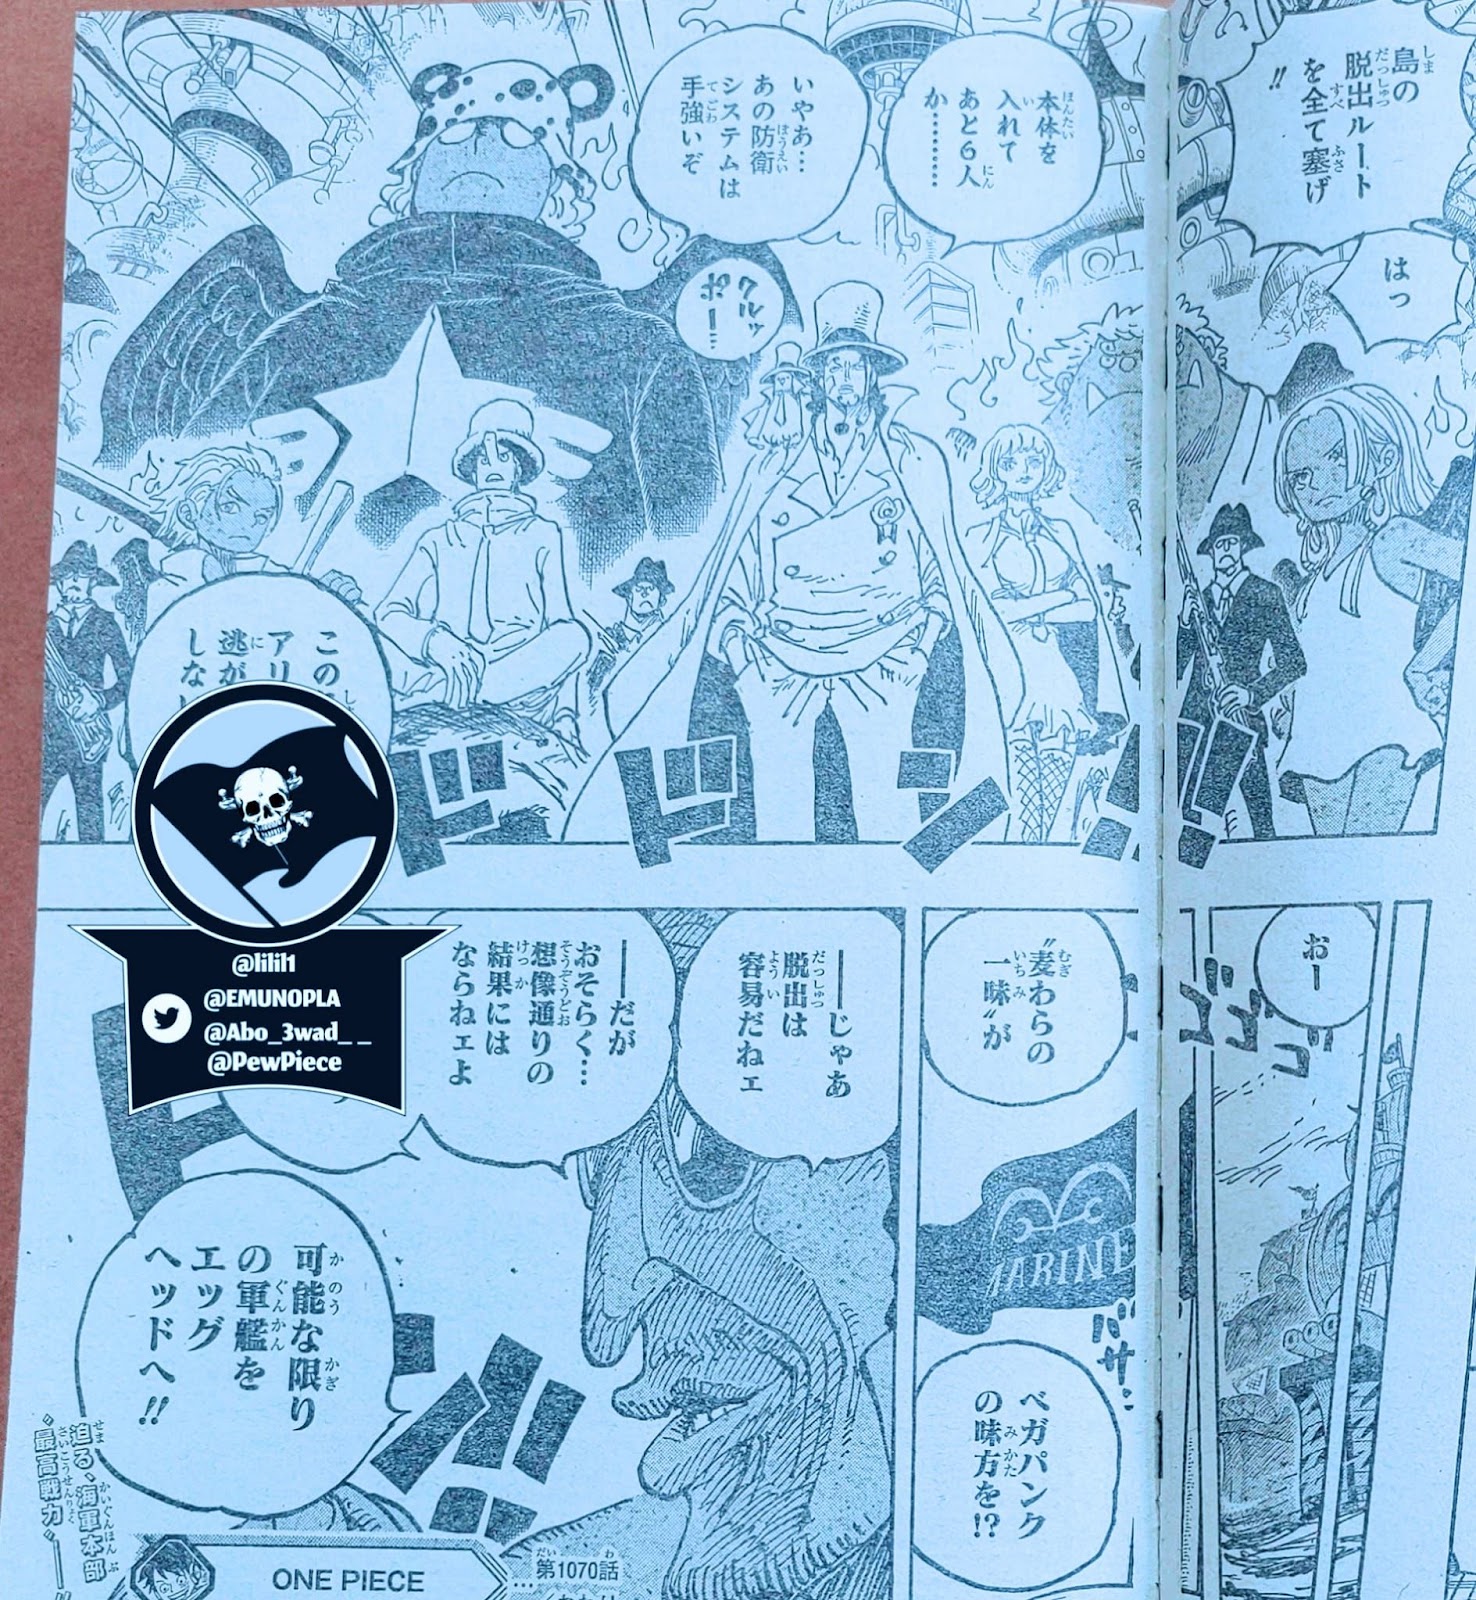 One Piece: Chapitre 1070 - Page 17